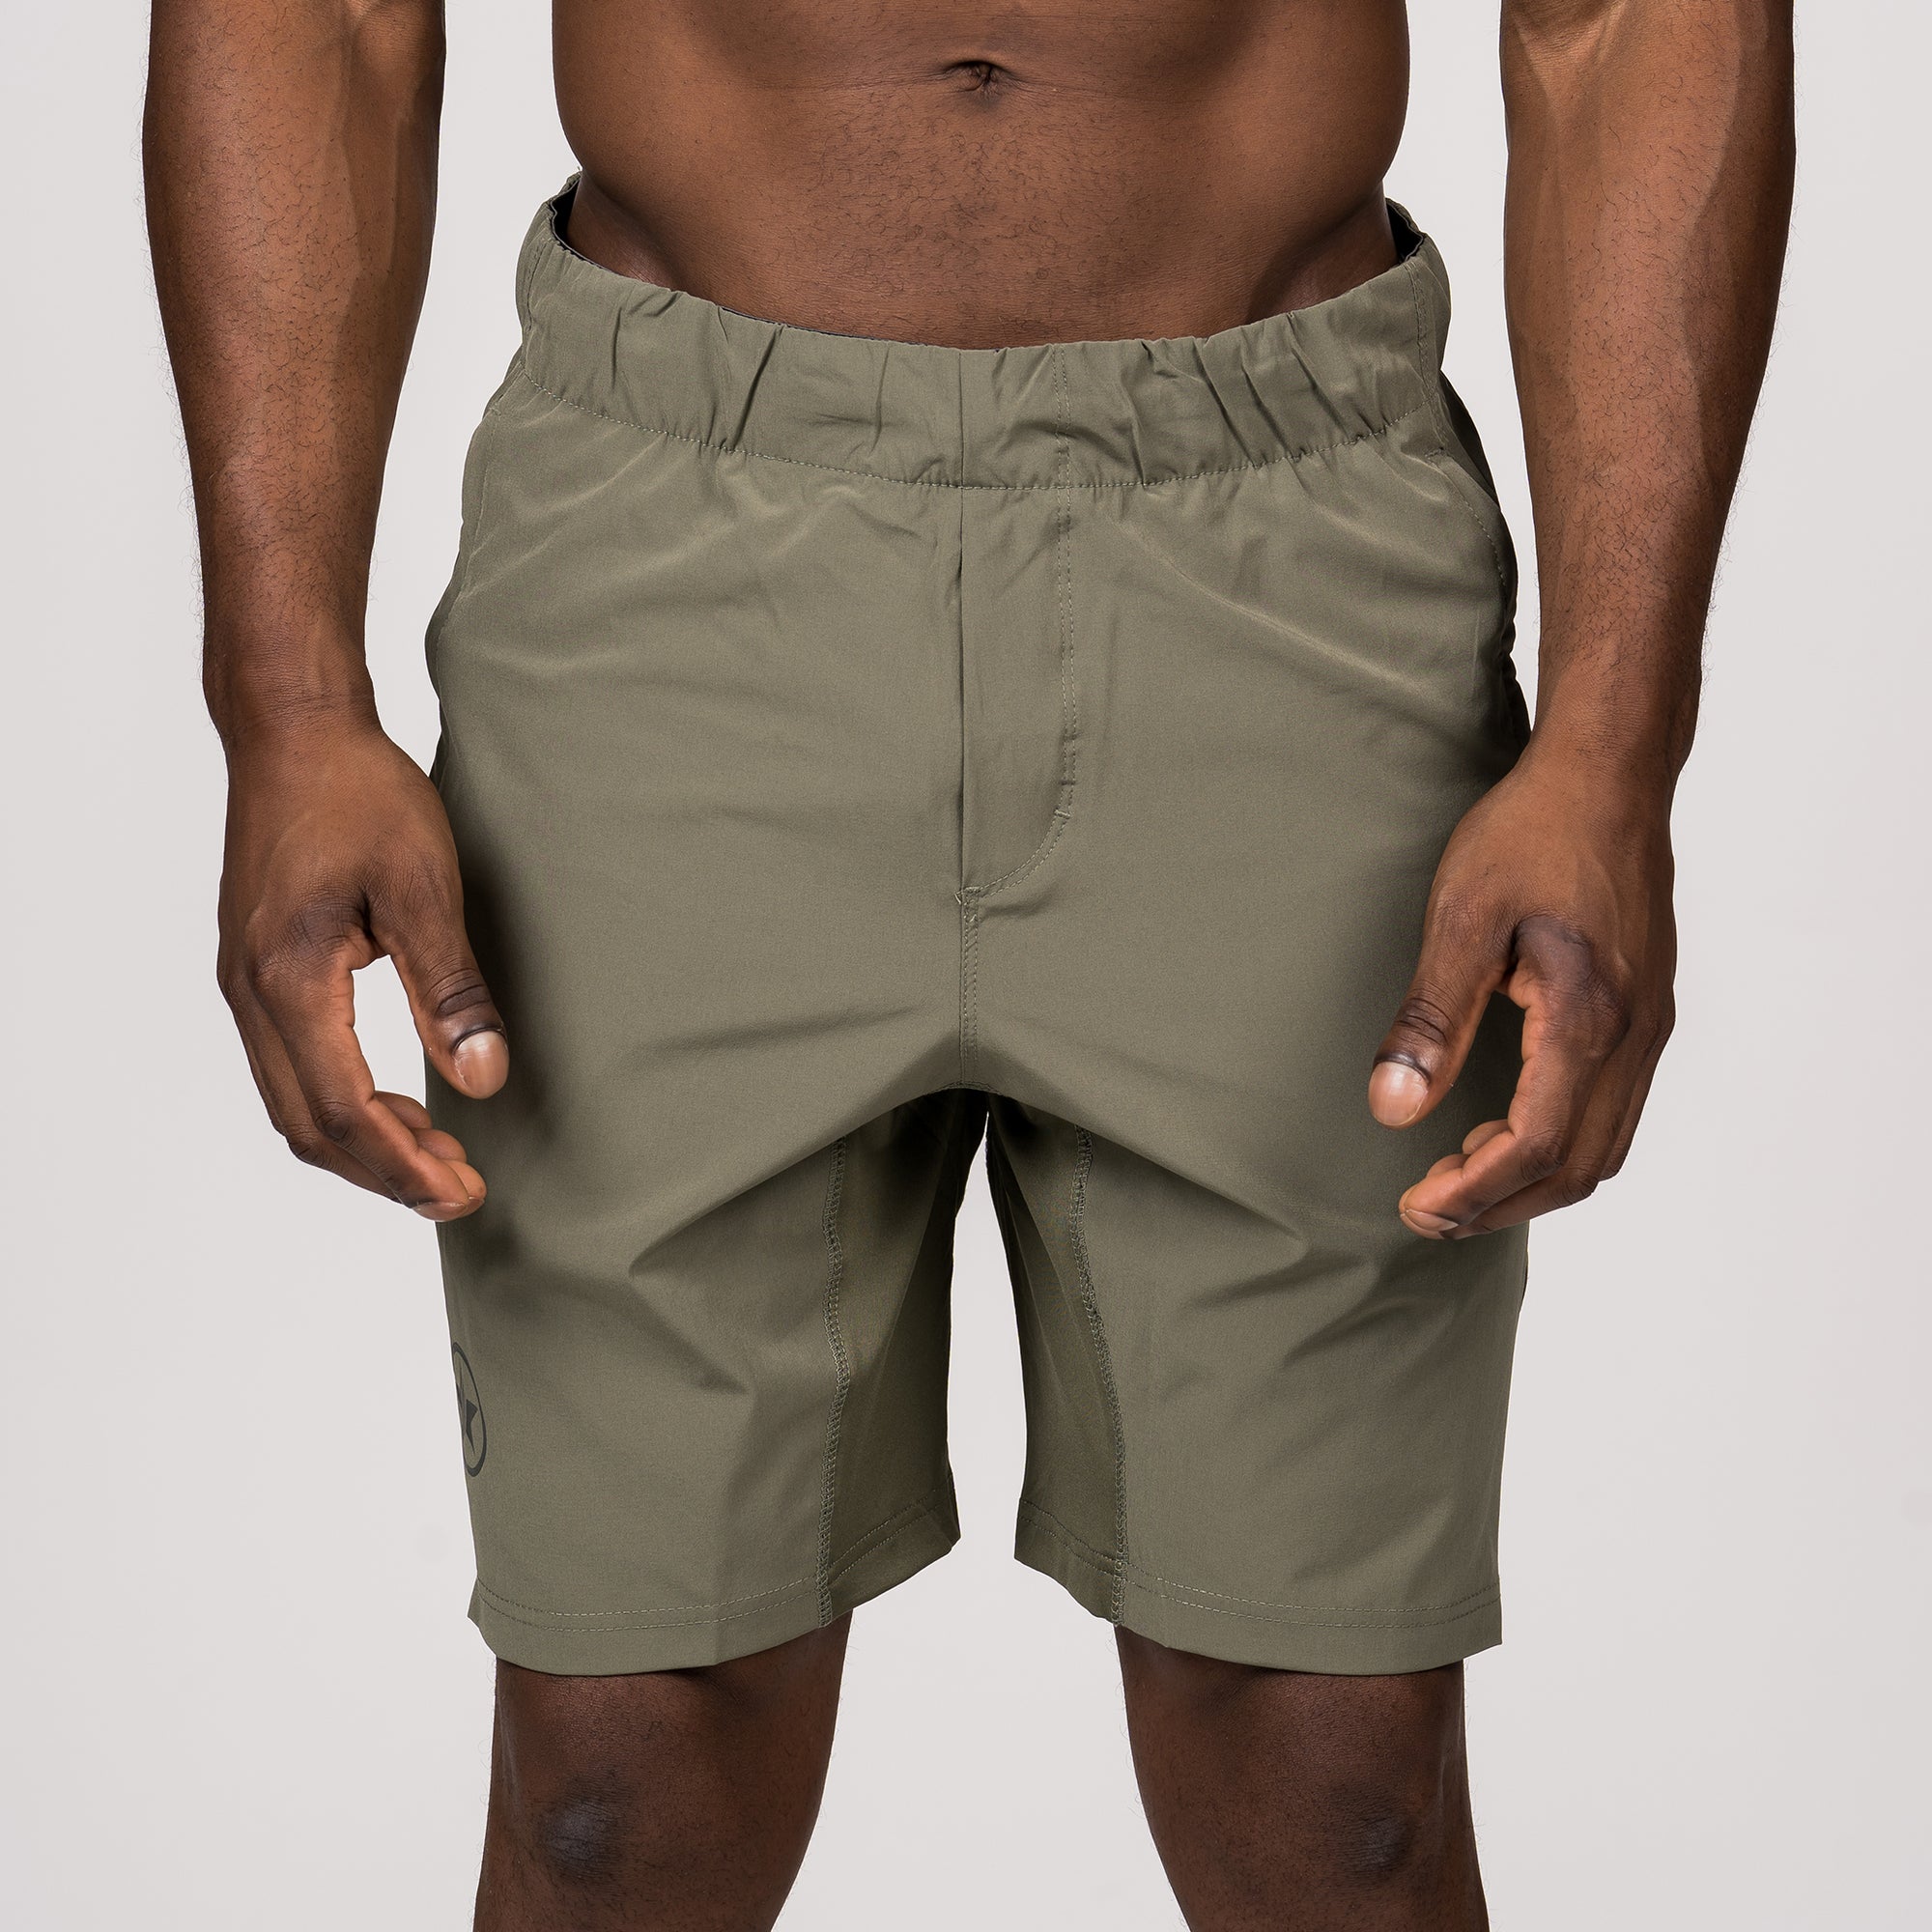 Men's Shorts - Competition 2.0 - Dusty Olive - Savage Barbell Apparel